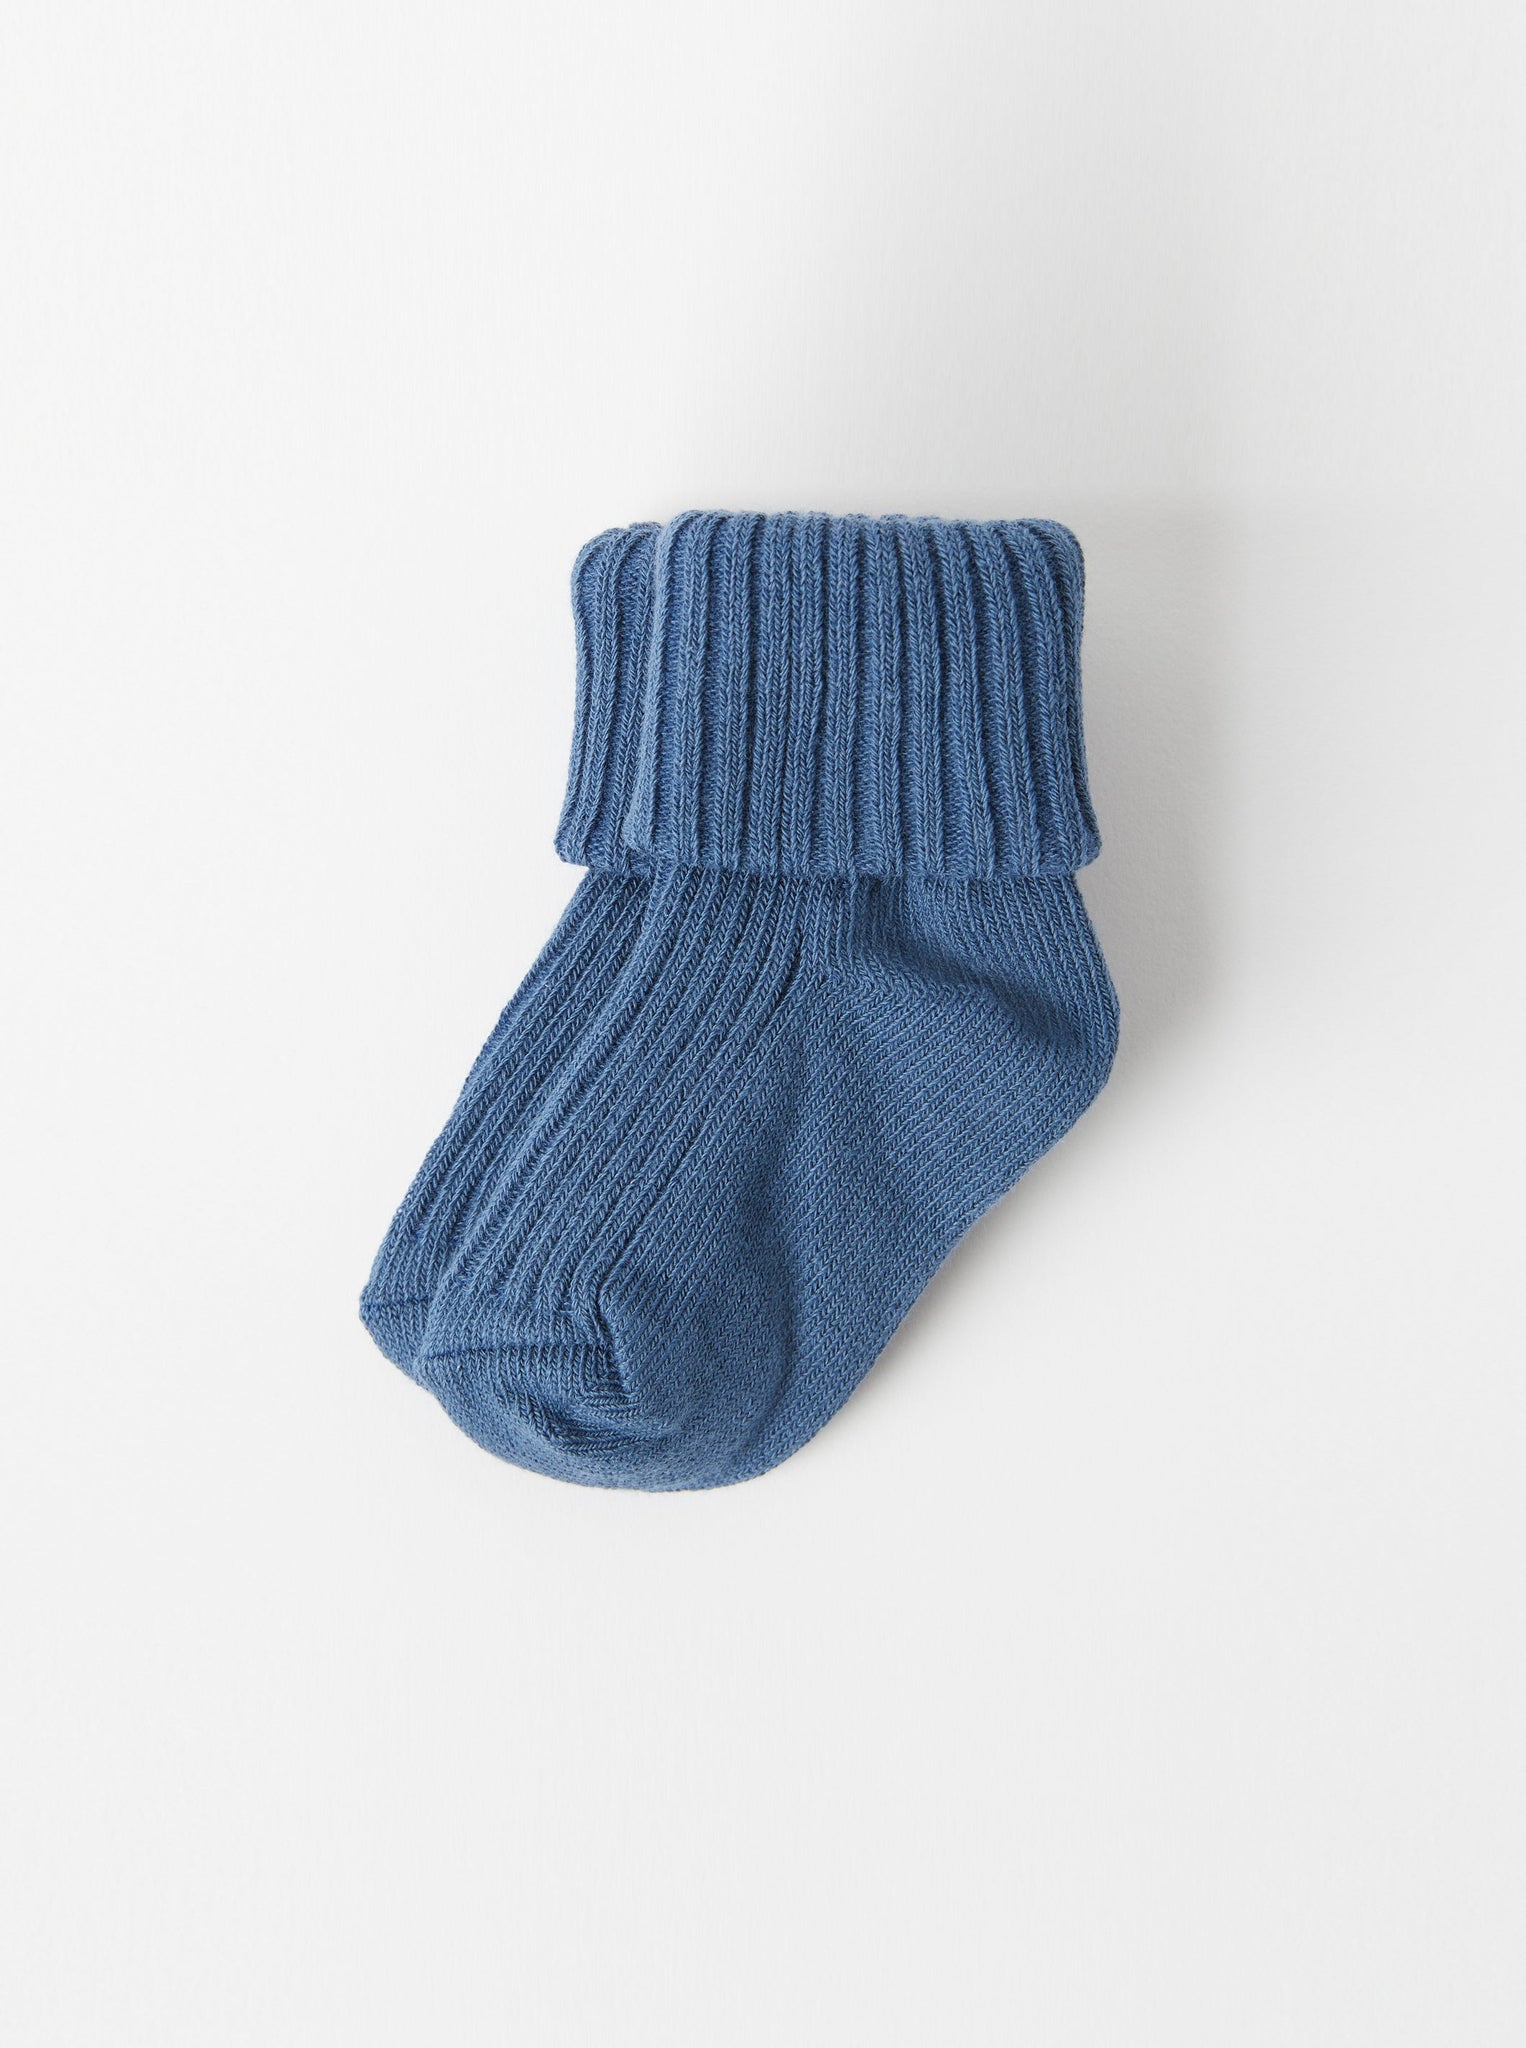 Organic Cotton Blue Baby Socks from the Polarn O. Pyret Kidswear collection. Nordic kids clothes made from sustainable sources.